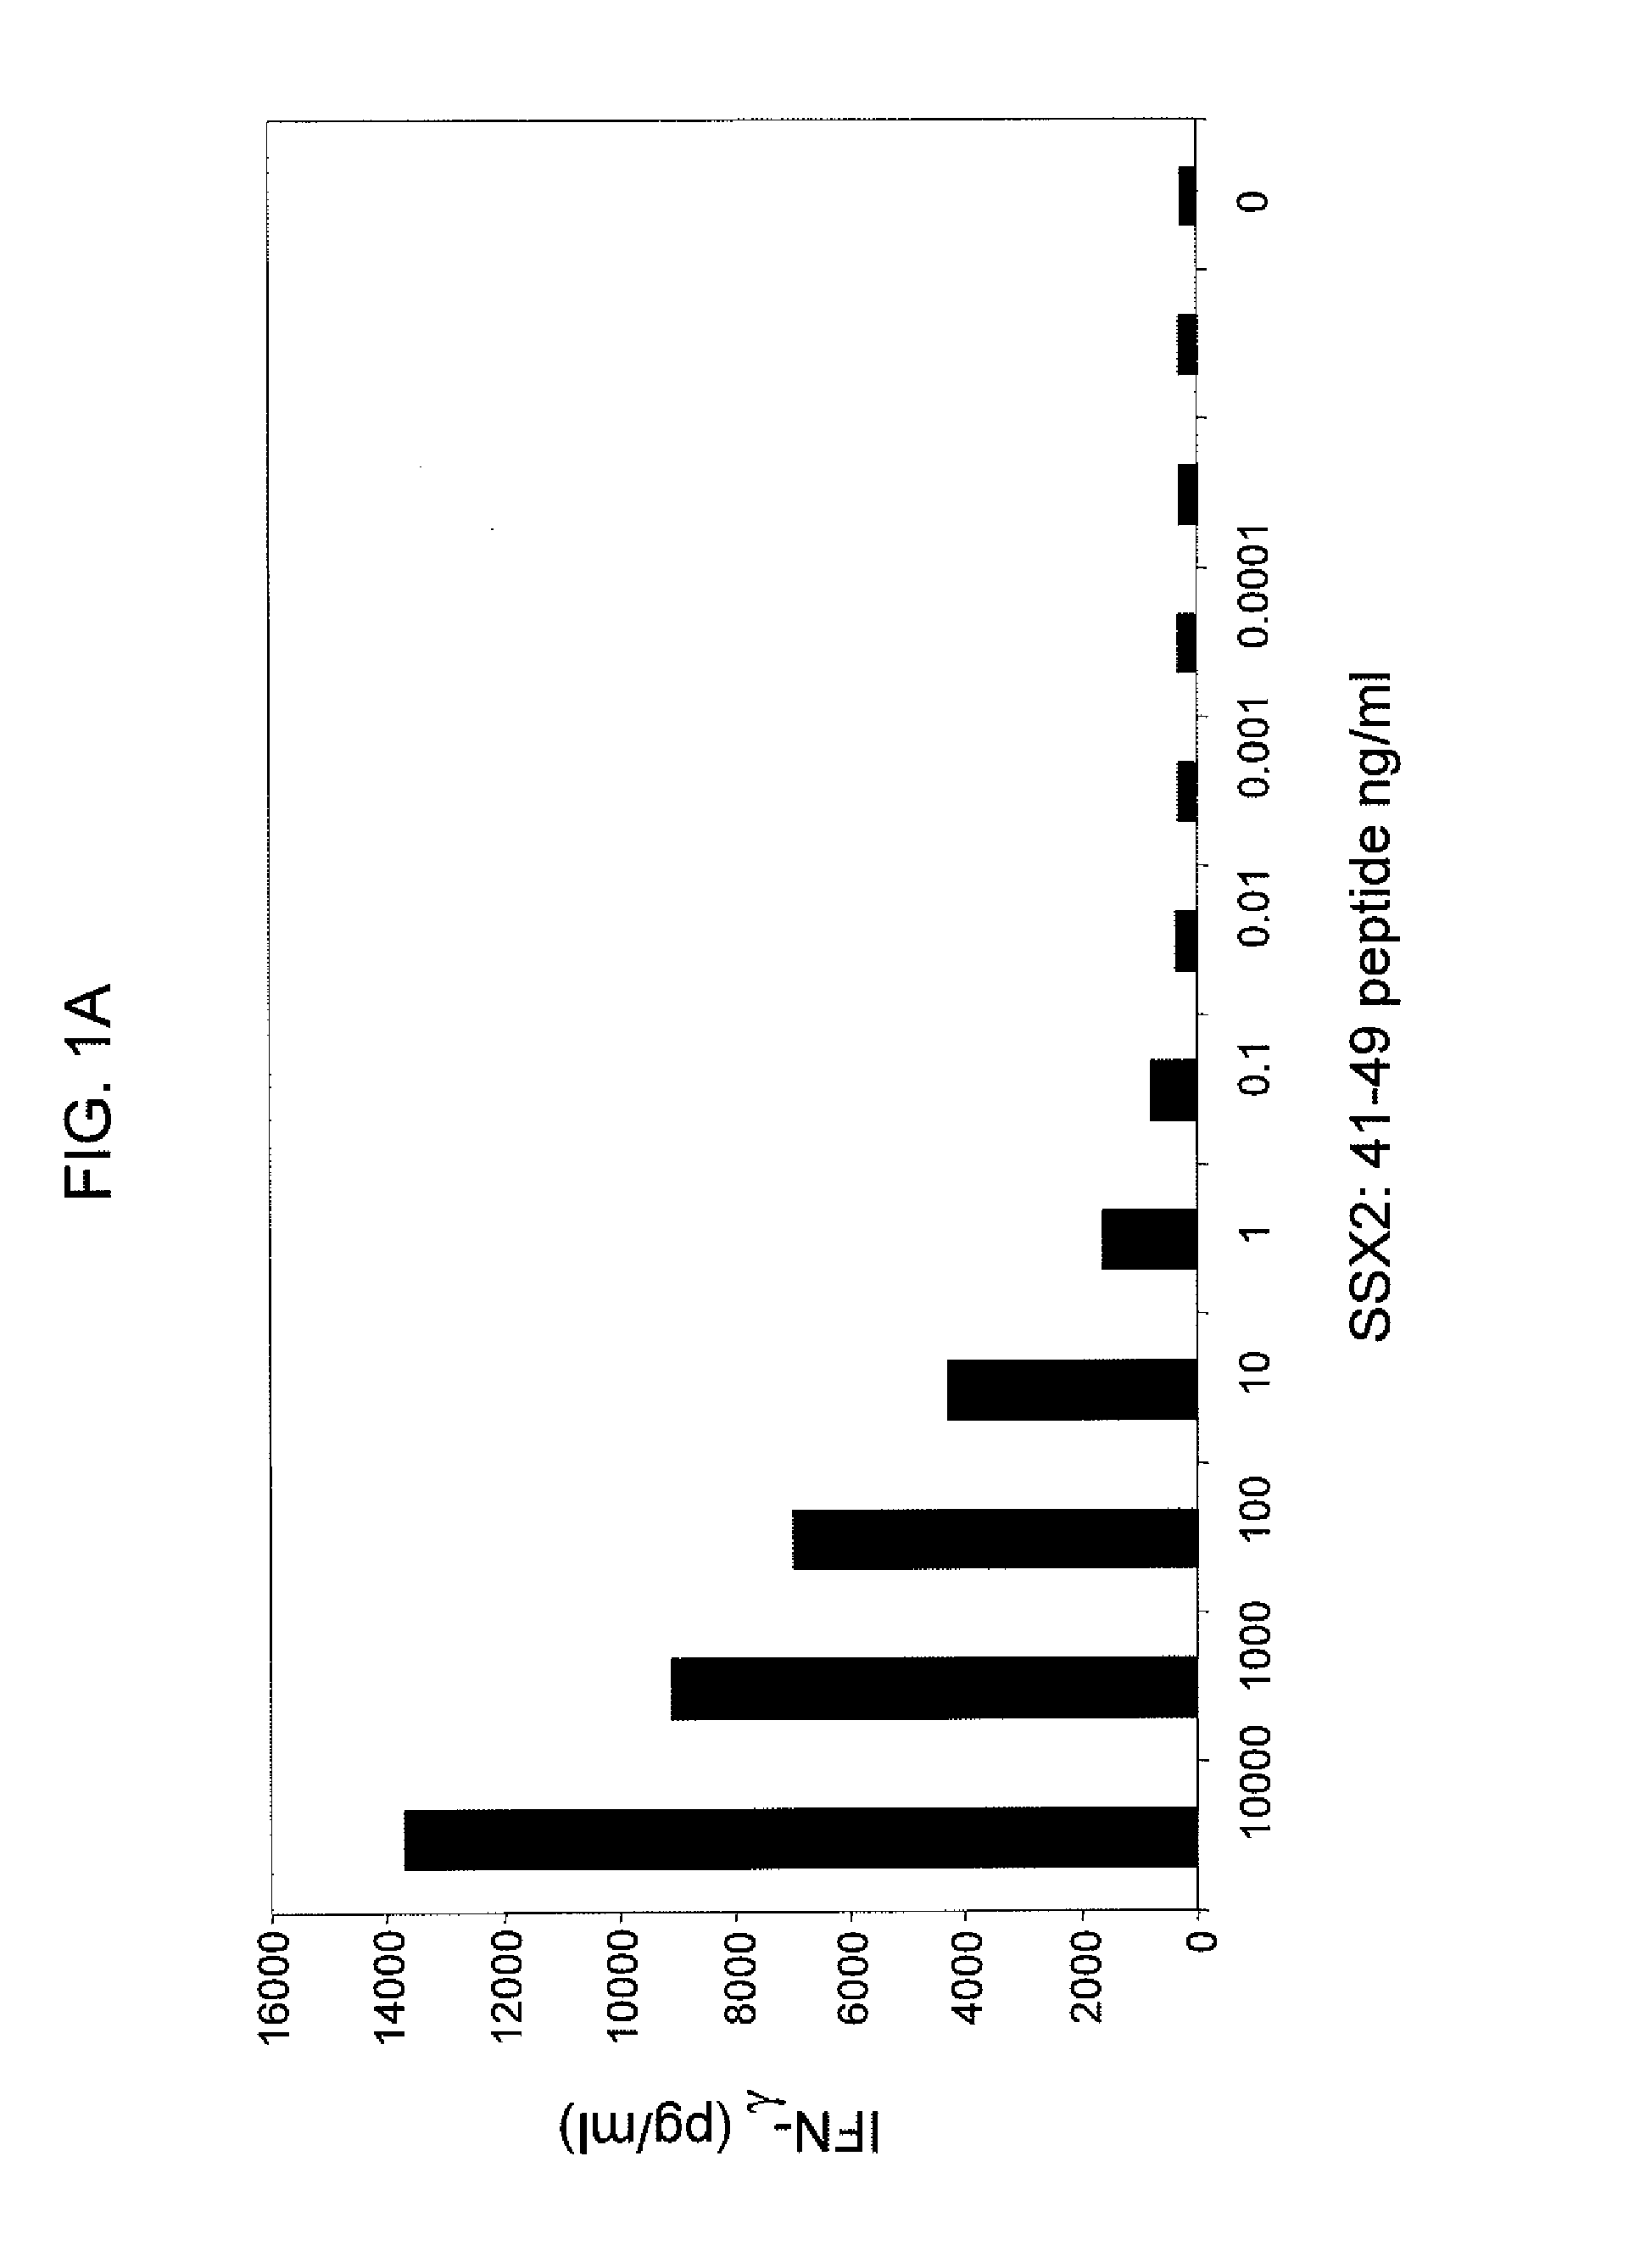 Anti-ssx-2 t cell receptors and related materials and methods of use